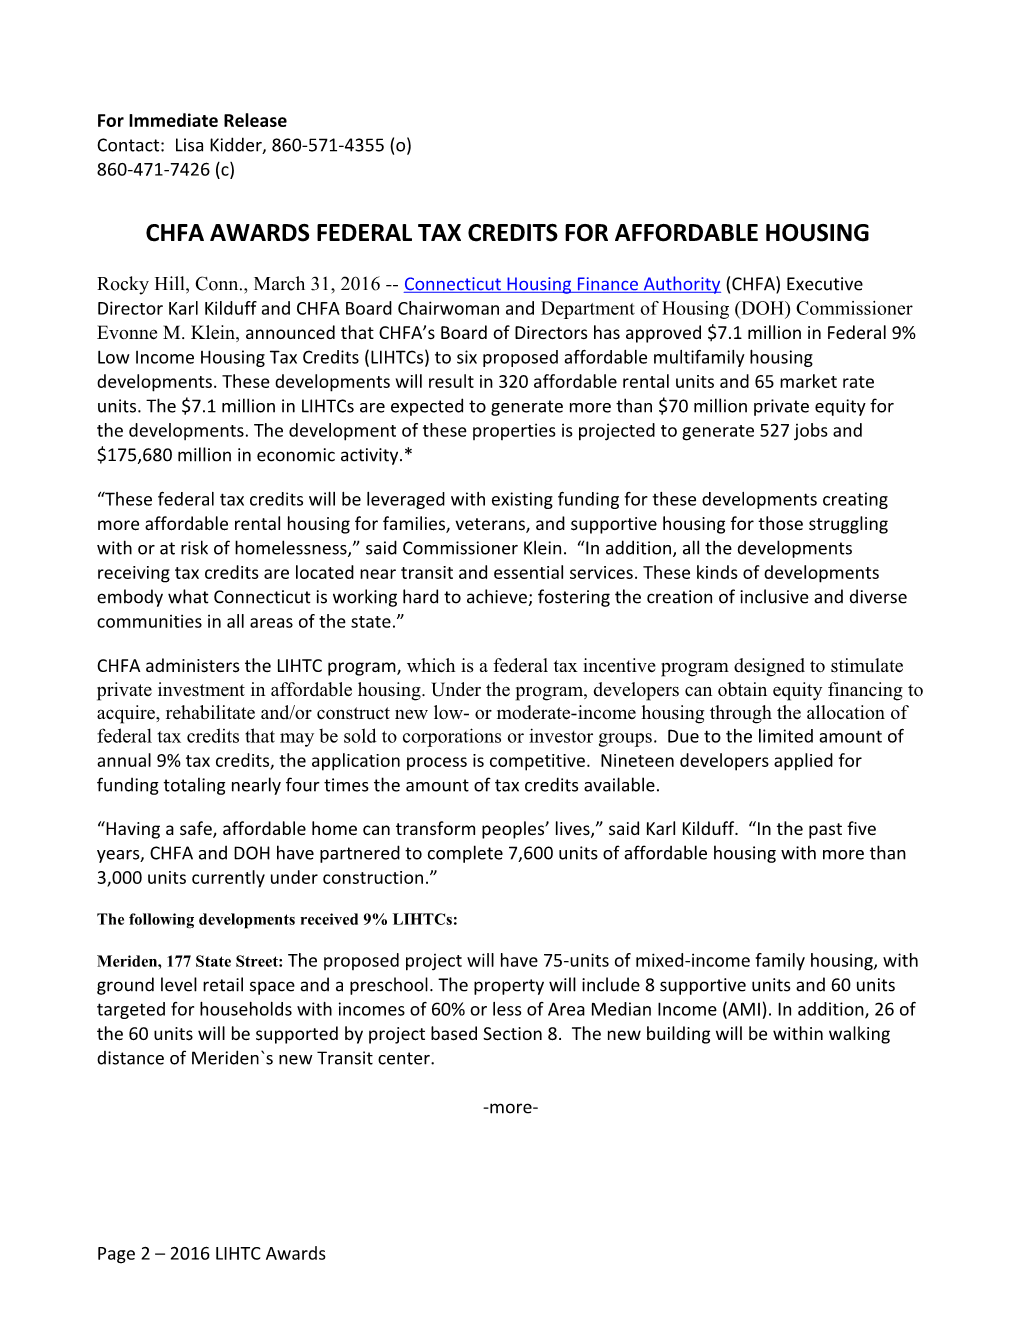 Chfa Awards Federal Tax Credits for Affordable Housing